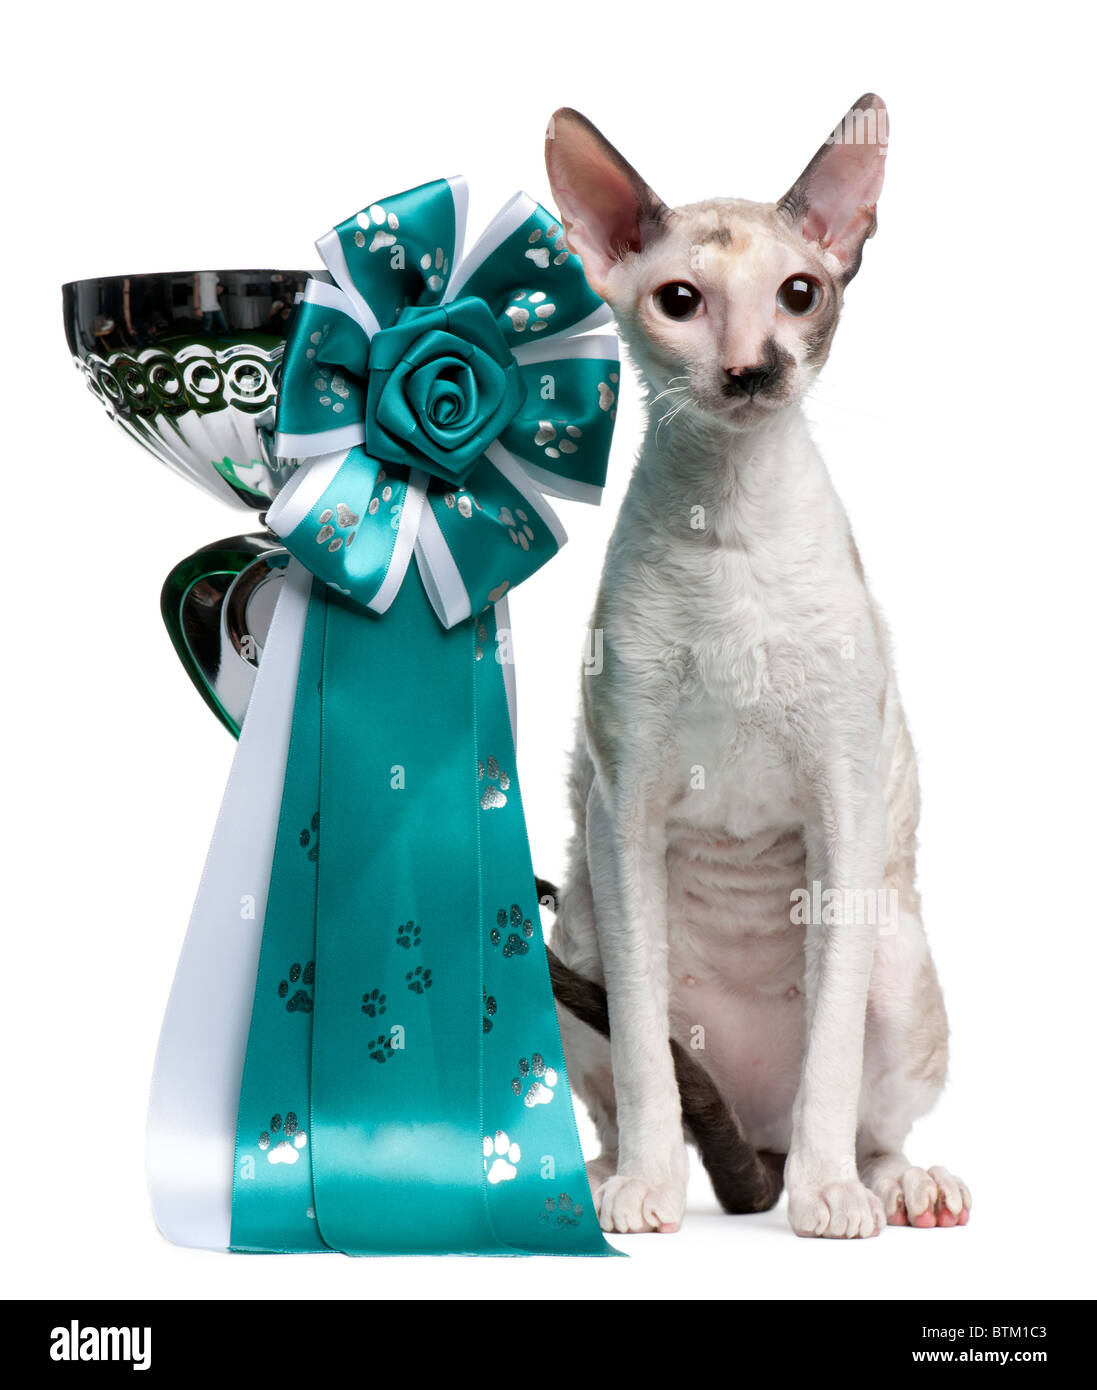 Cornish Rex cat, 7 months old, sitting next to prize in front of white background Stock Photo